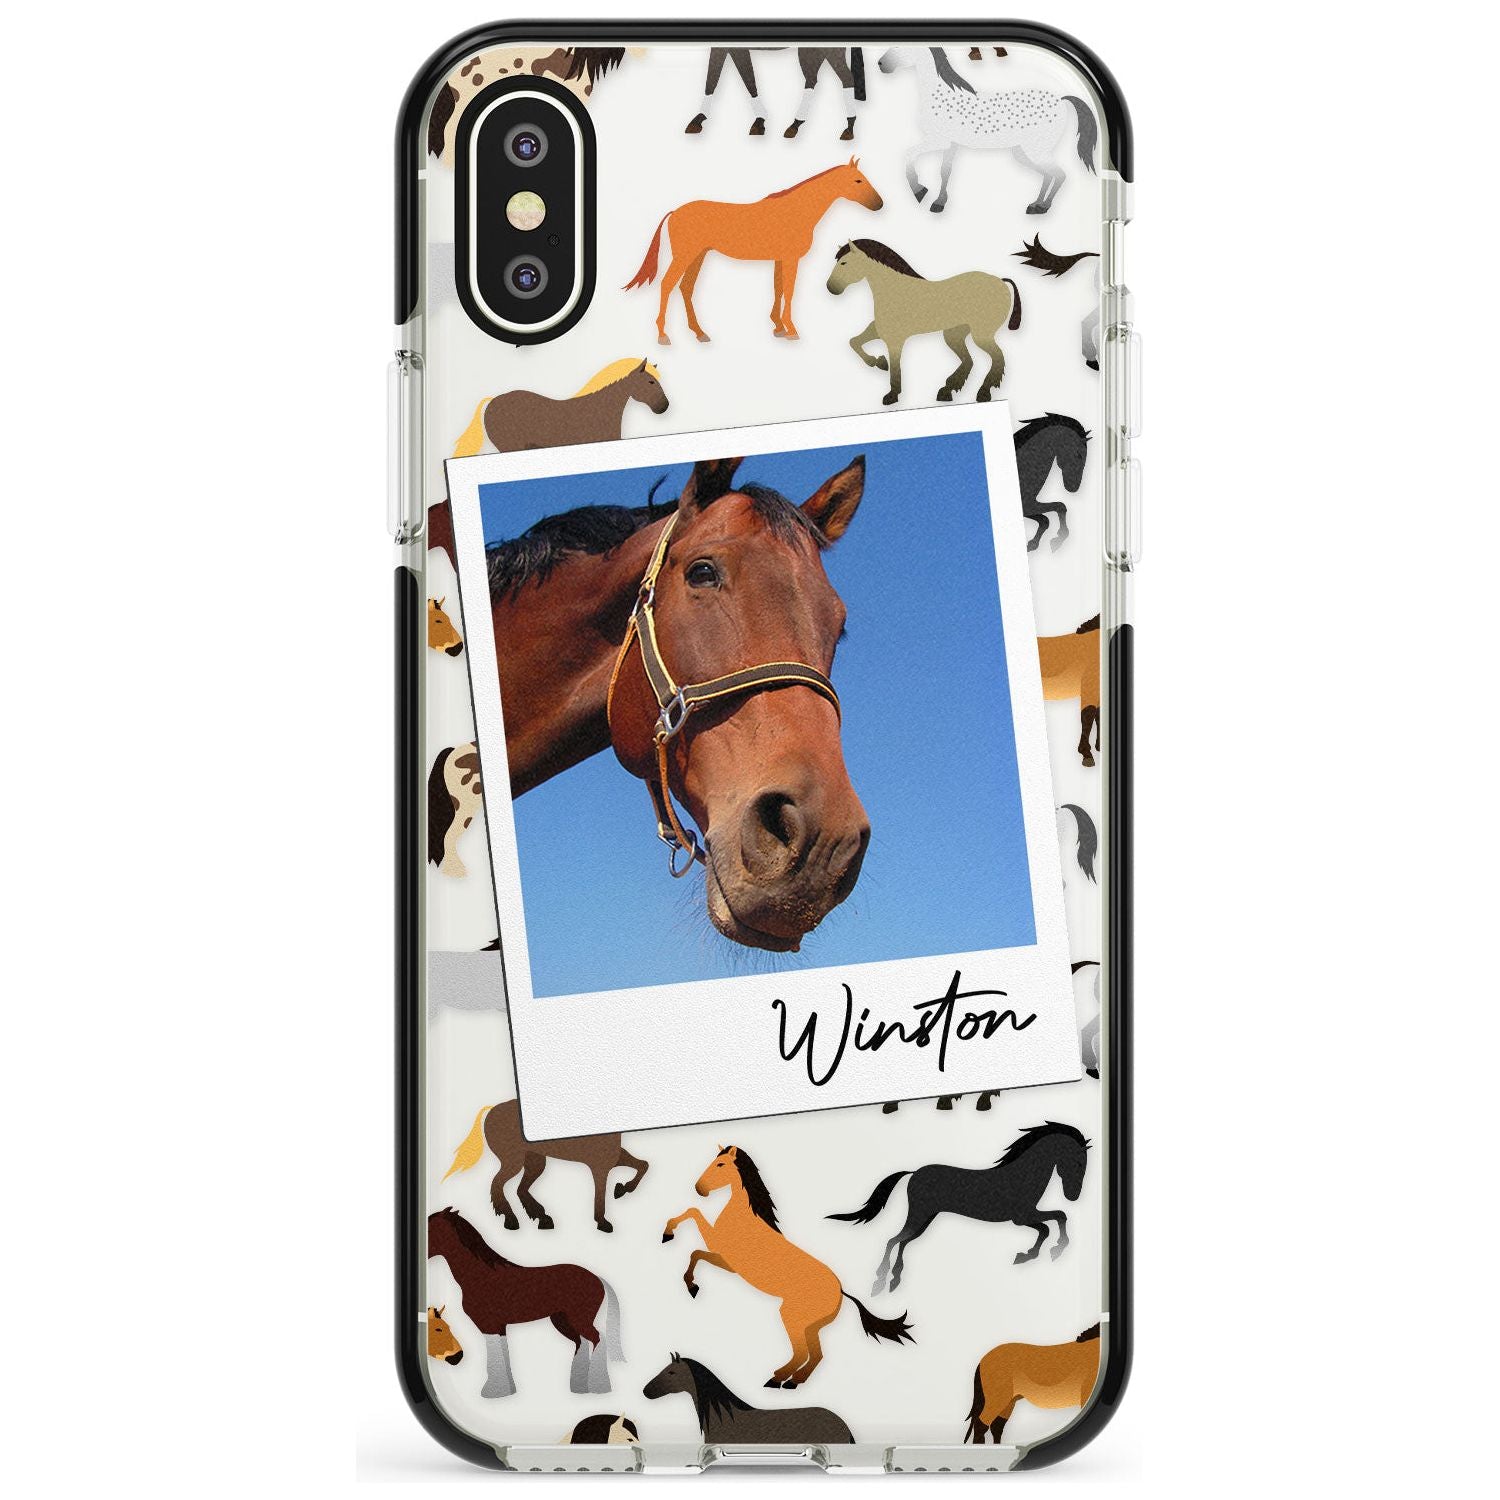 Personalised Horse Polaroid Black Impact Phone Case for iPhone X XS Max XR